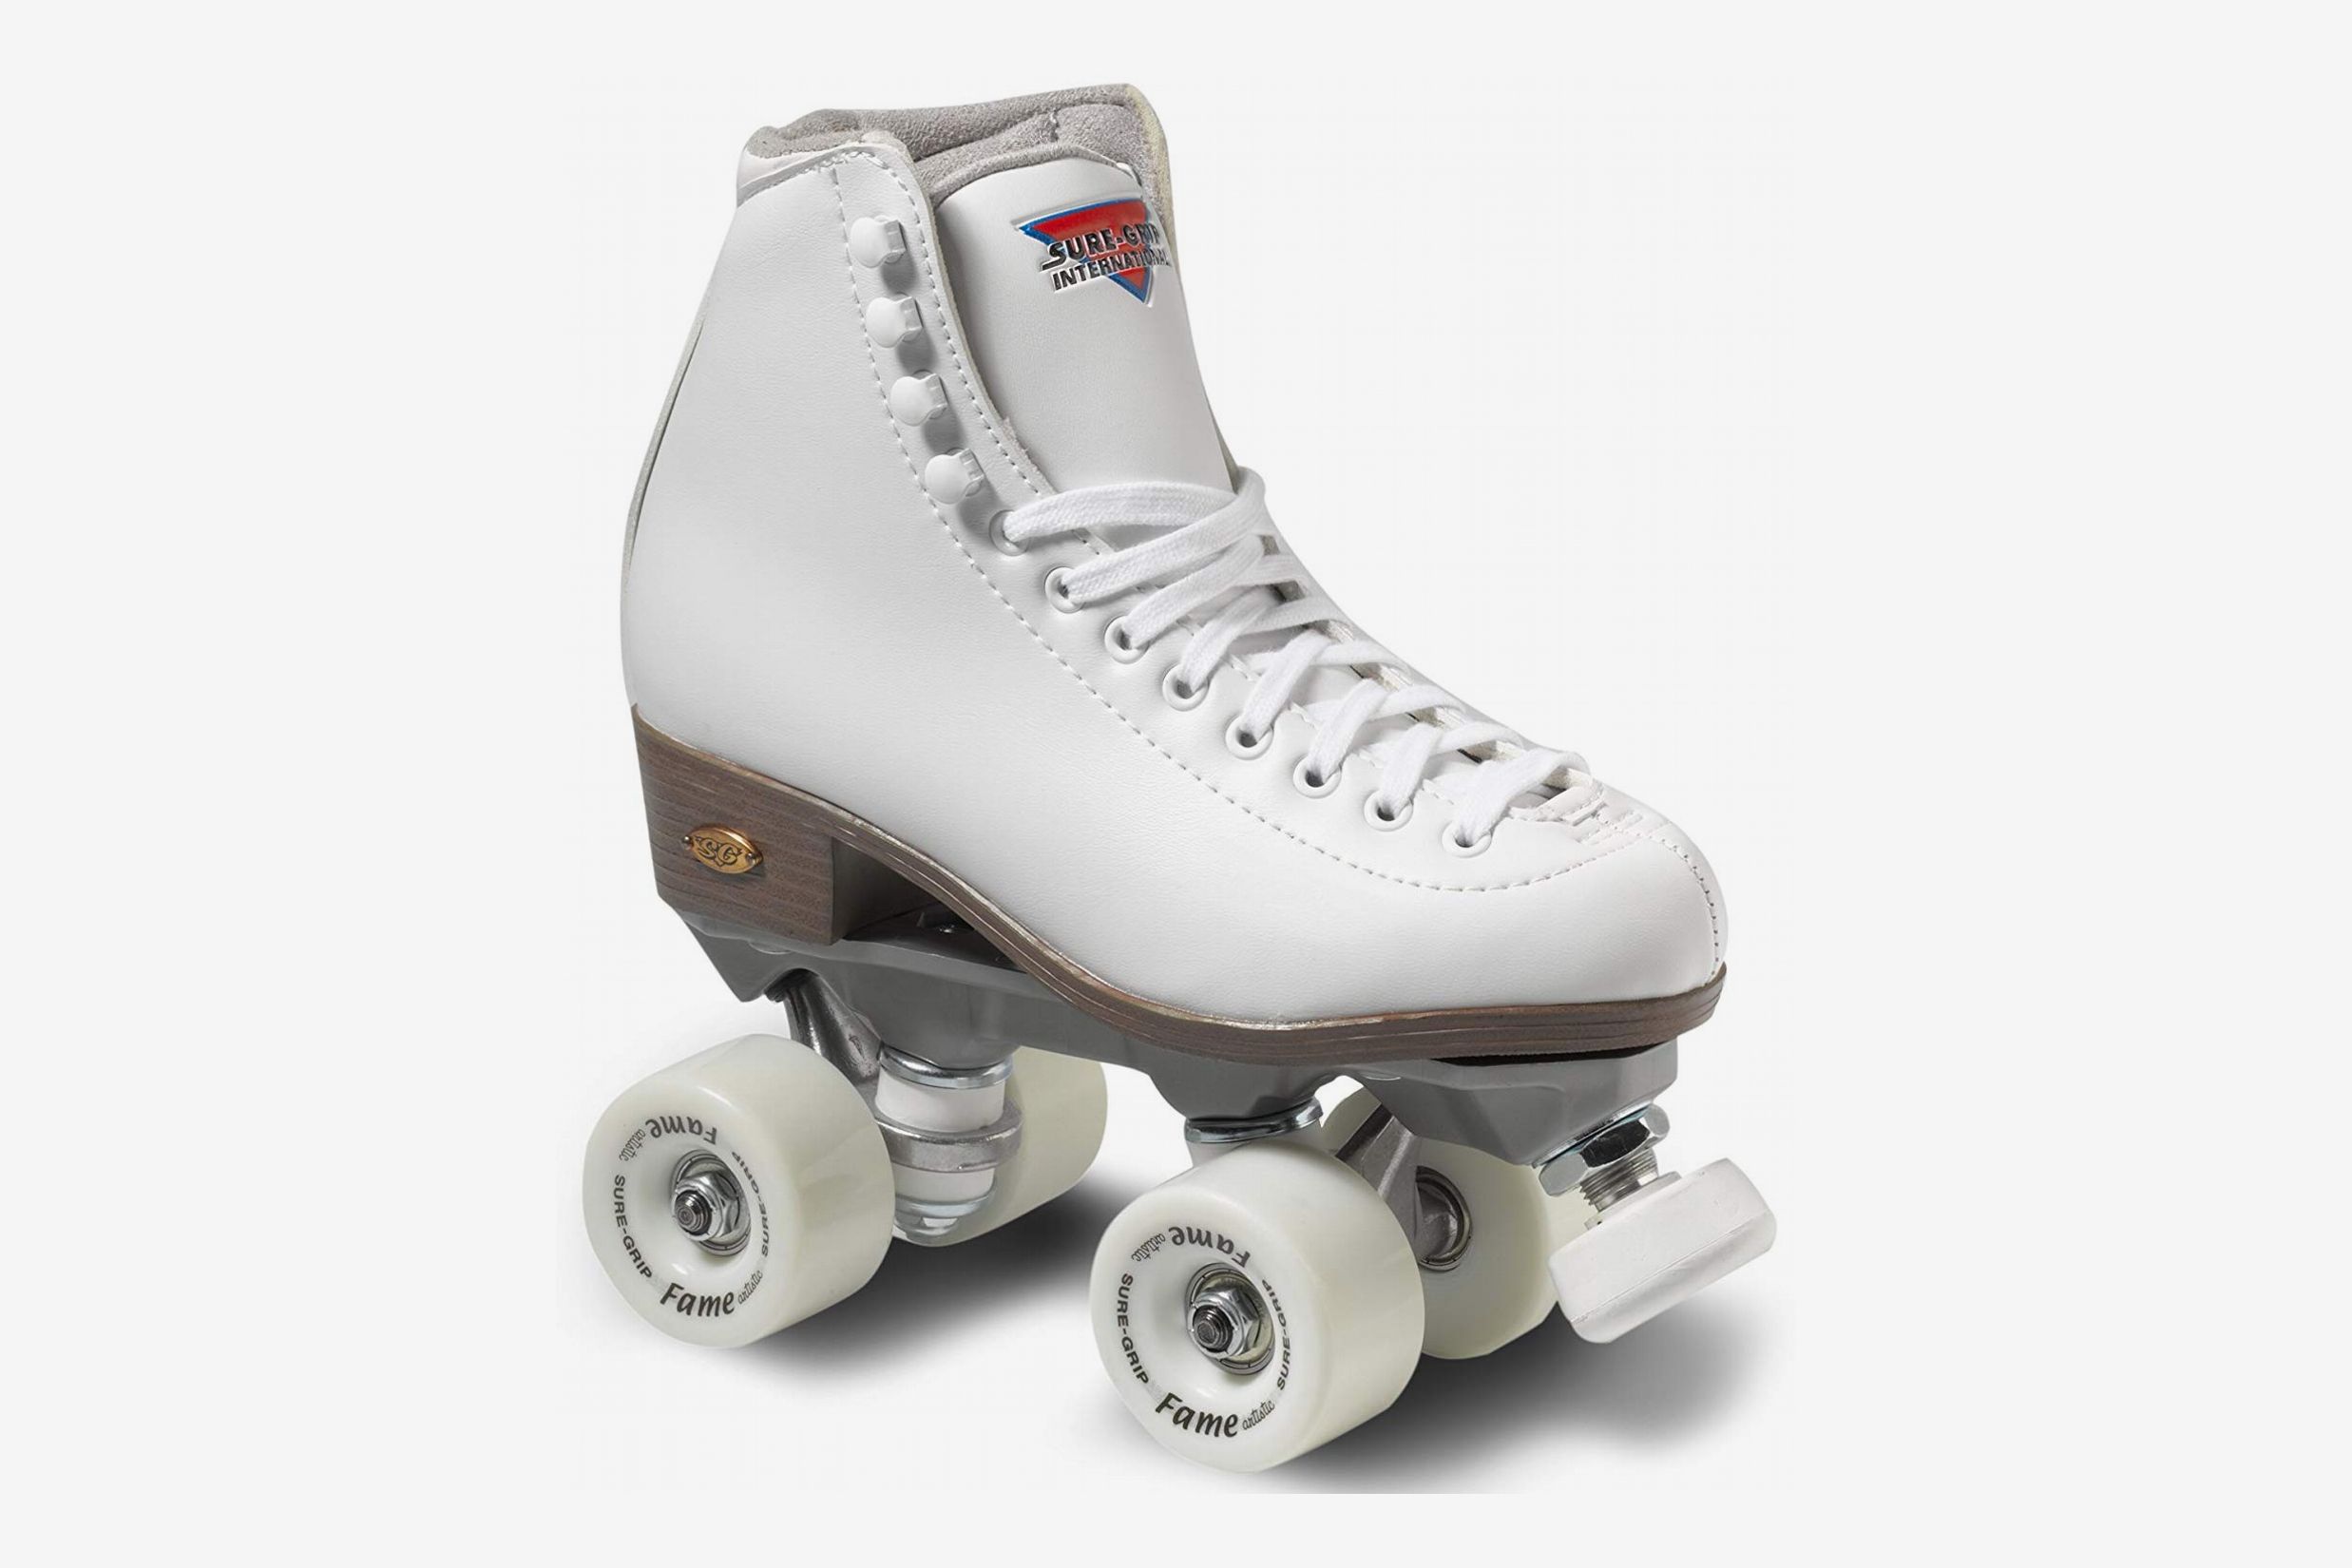 Redson Womens Roller Skates Four-Wheels Artificial Leather High-top Roller Skates Perfect Indoor Outdoor Adult Roller Skates with Bag 